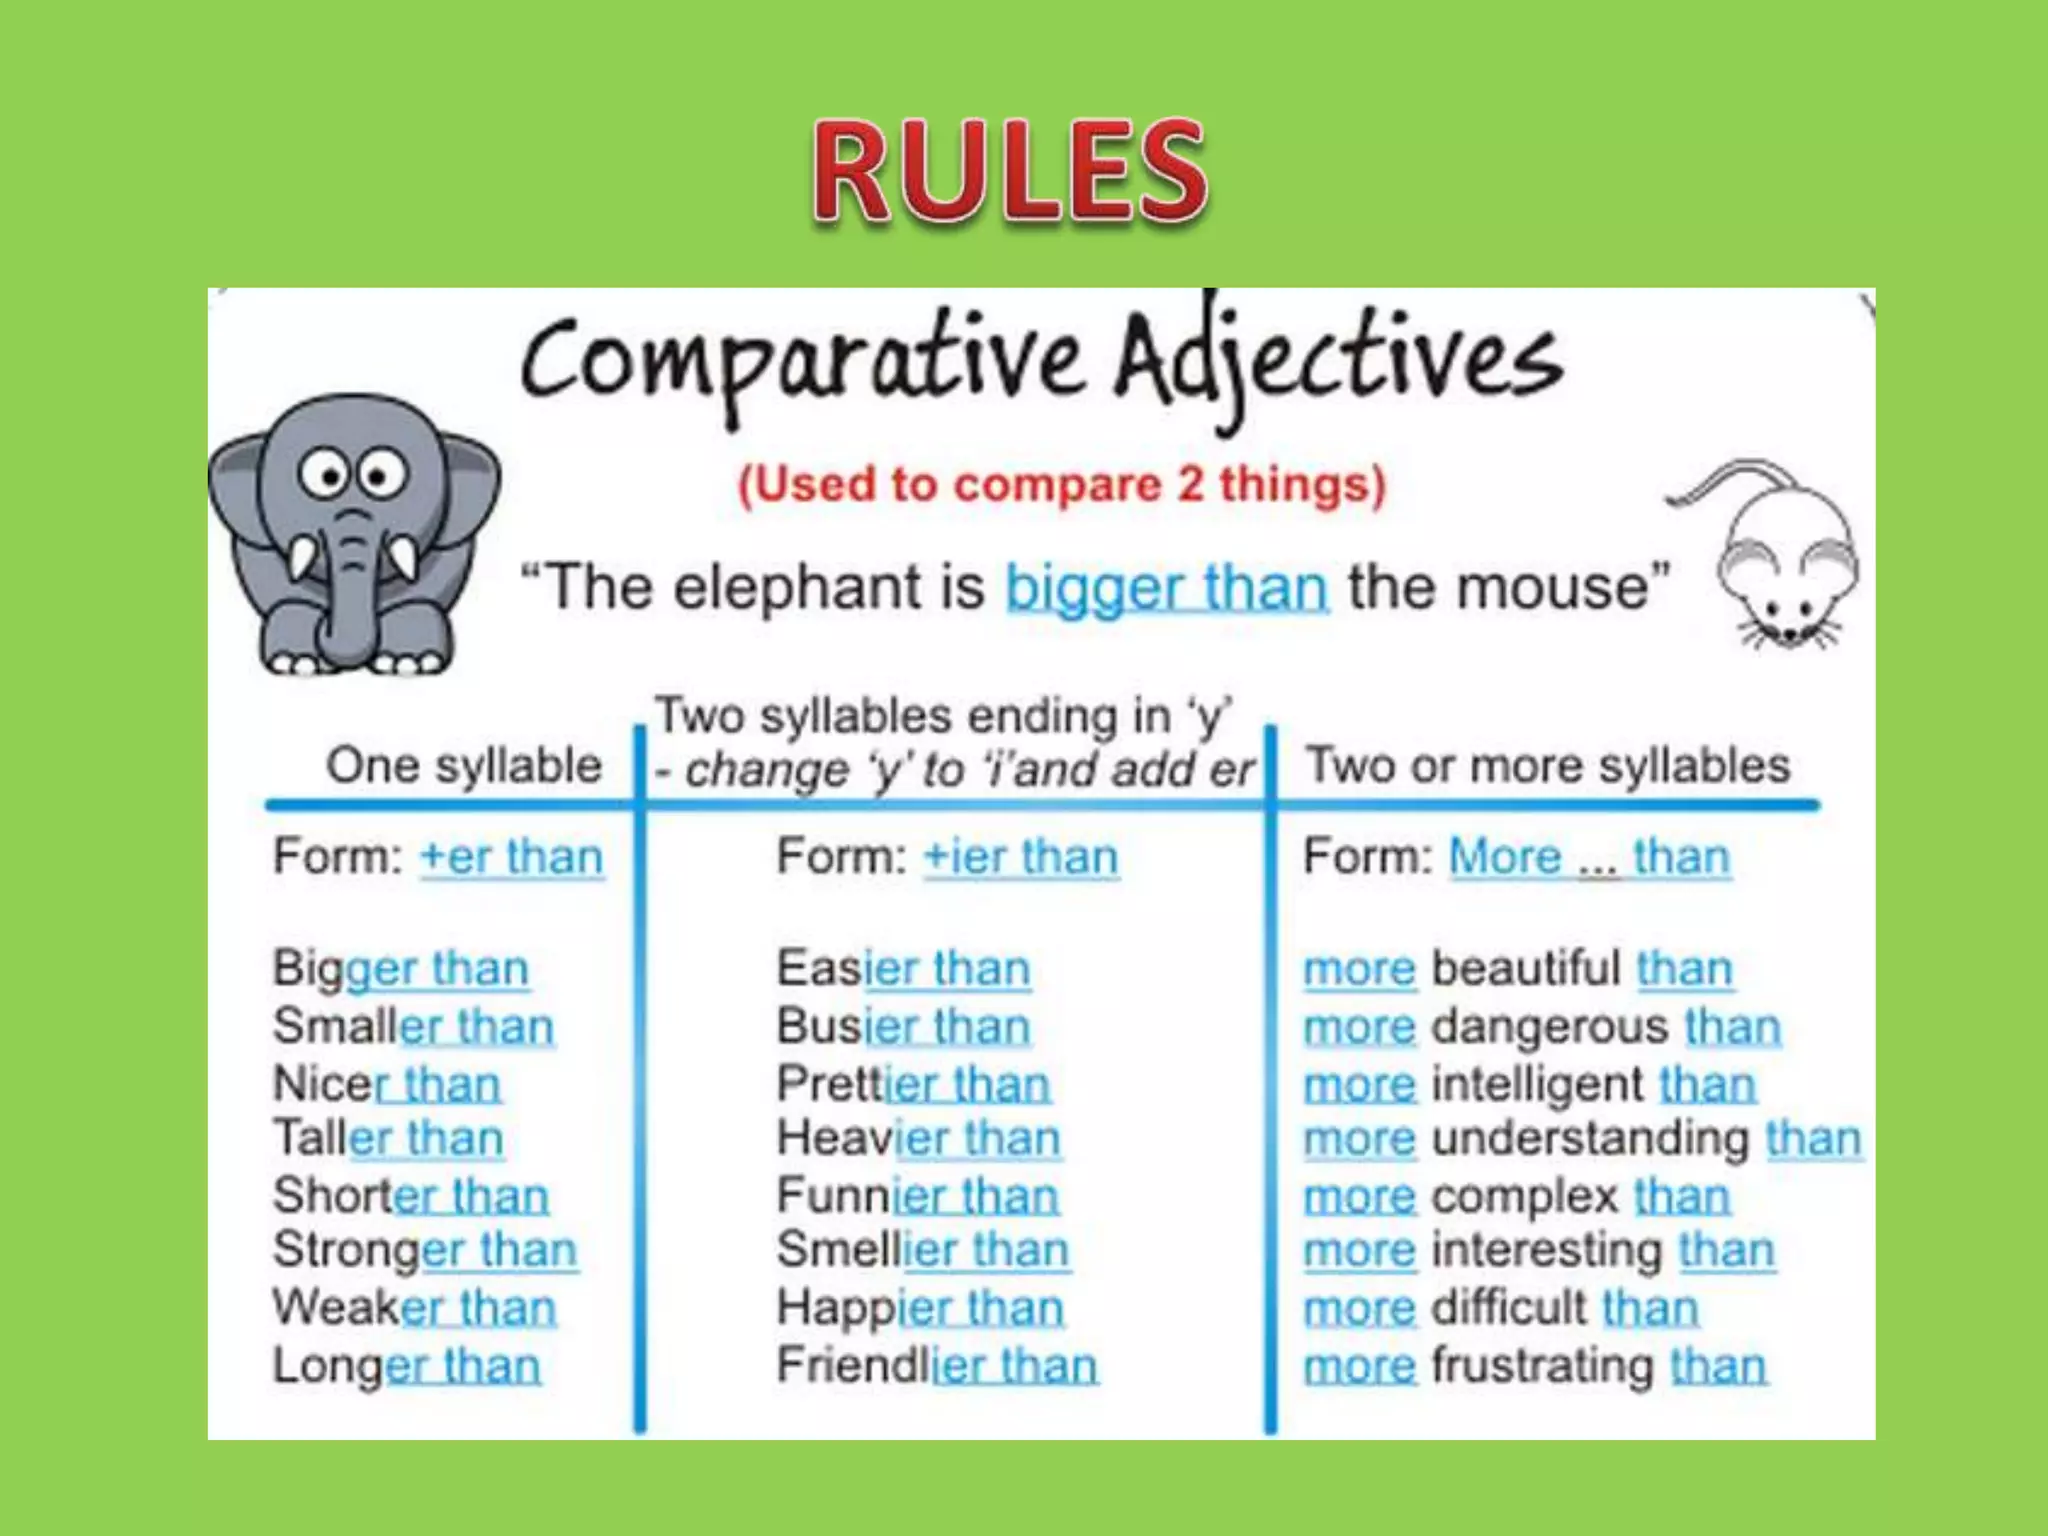 Use degrees of comparison. Comparatives and Superlatives. Superlative adjectives правило. Comparatives and Superlatives правило. Comparative adjectives правило для детей.